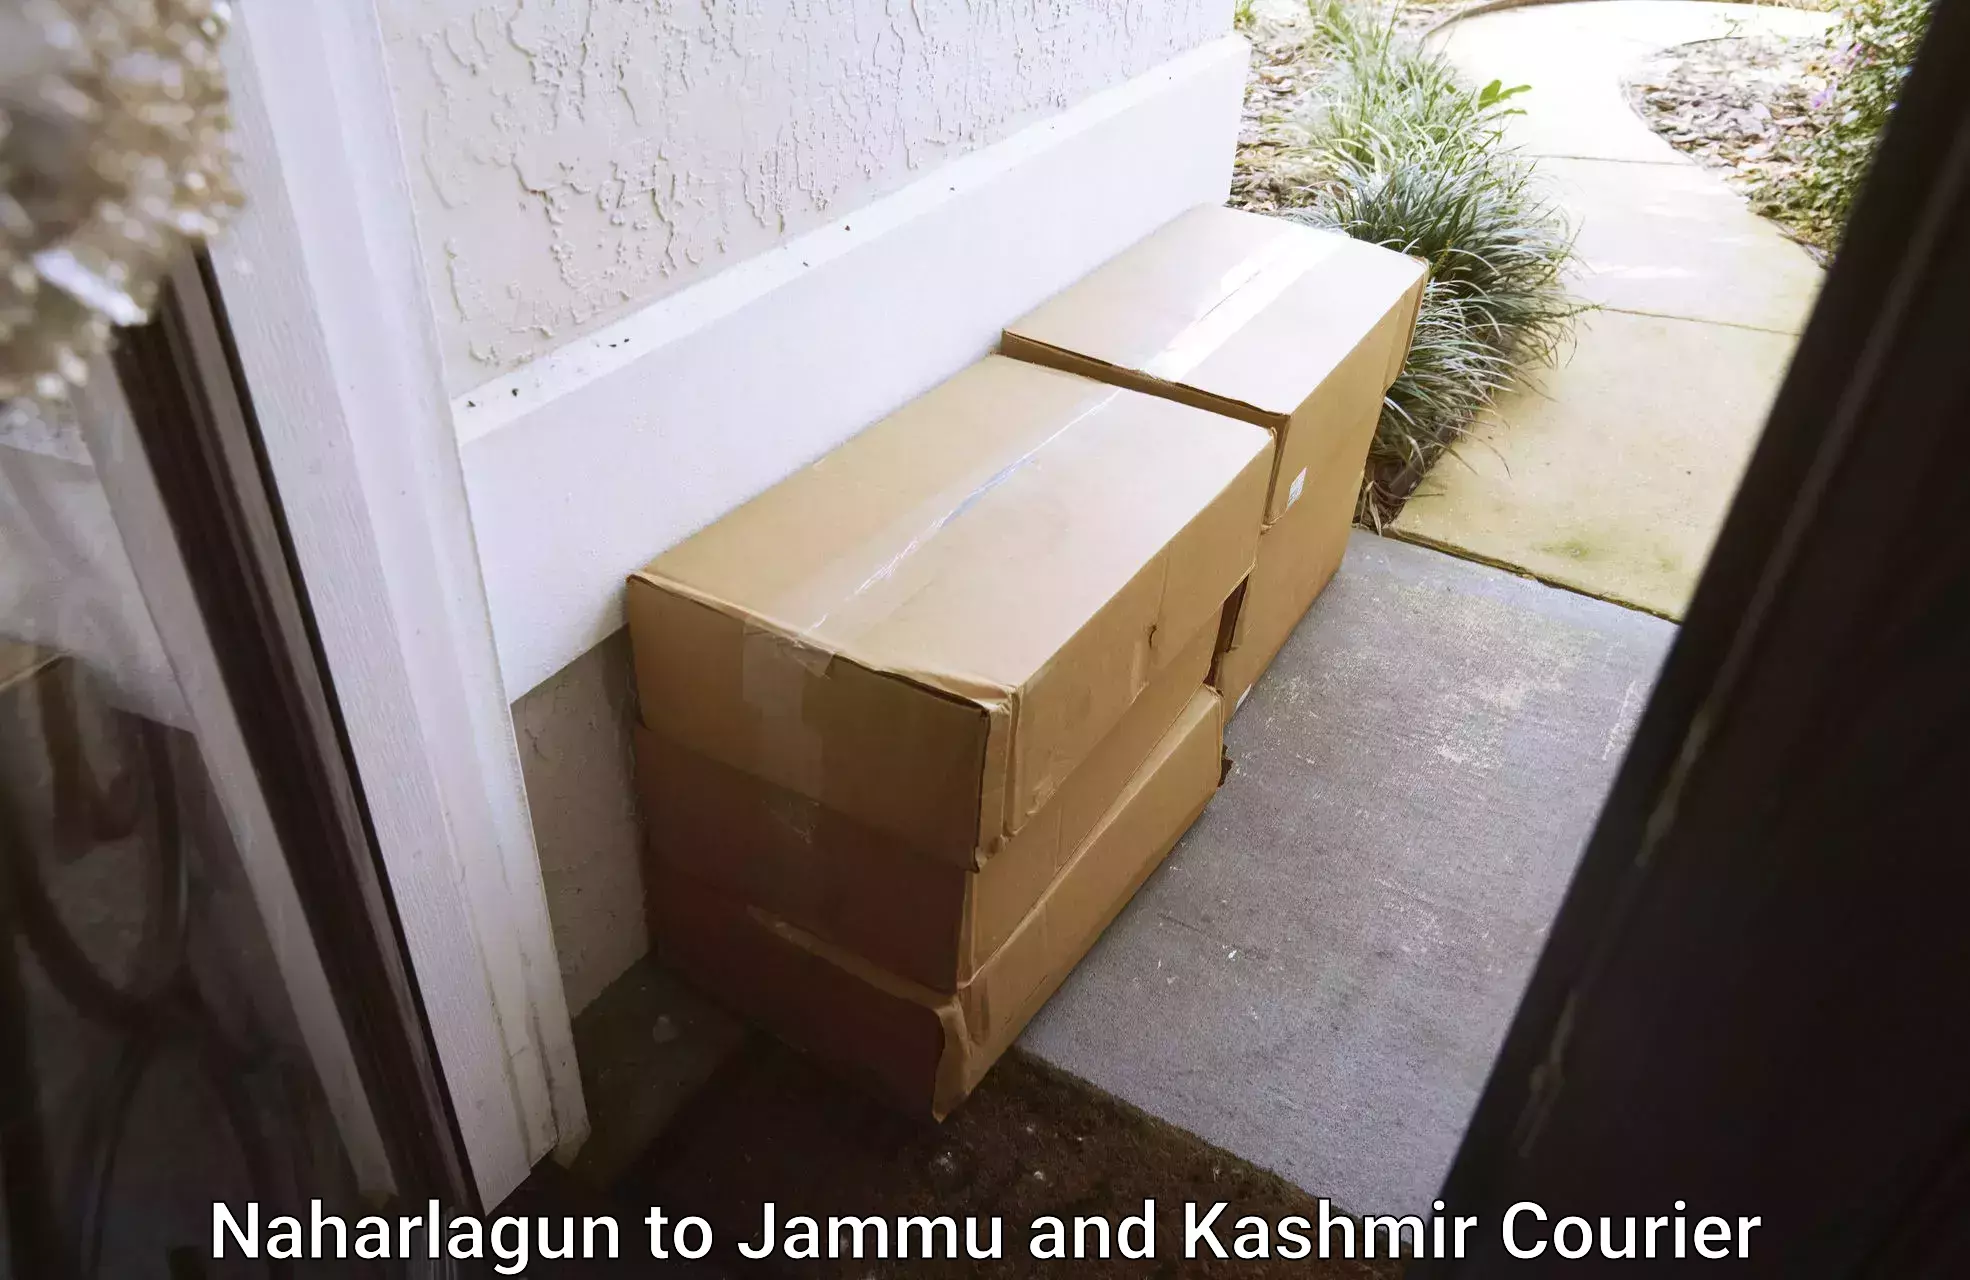 Same-day delivery solutions Naharlagun to Kulgam